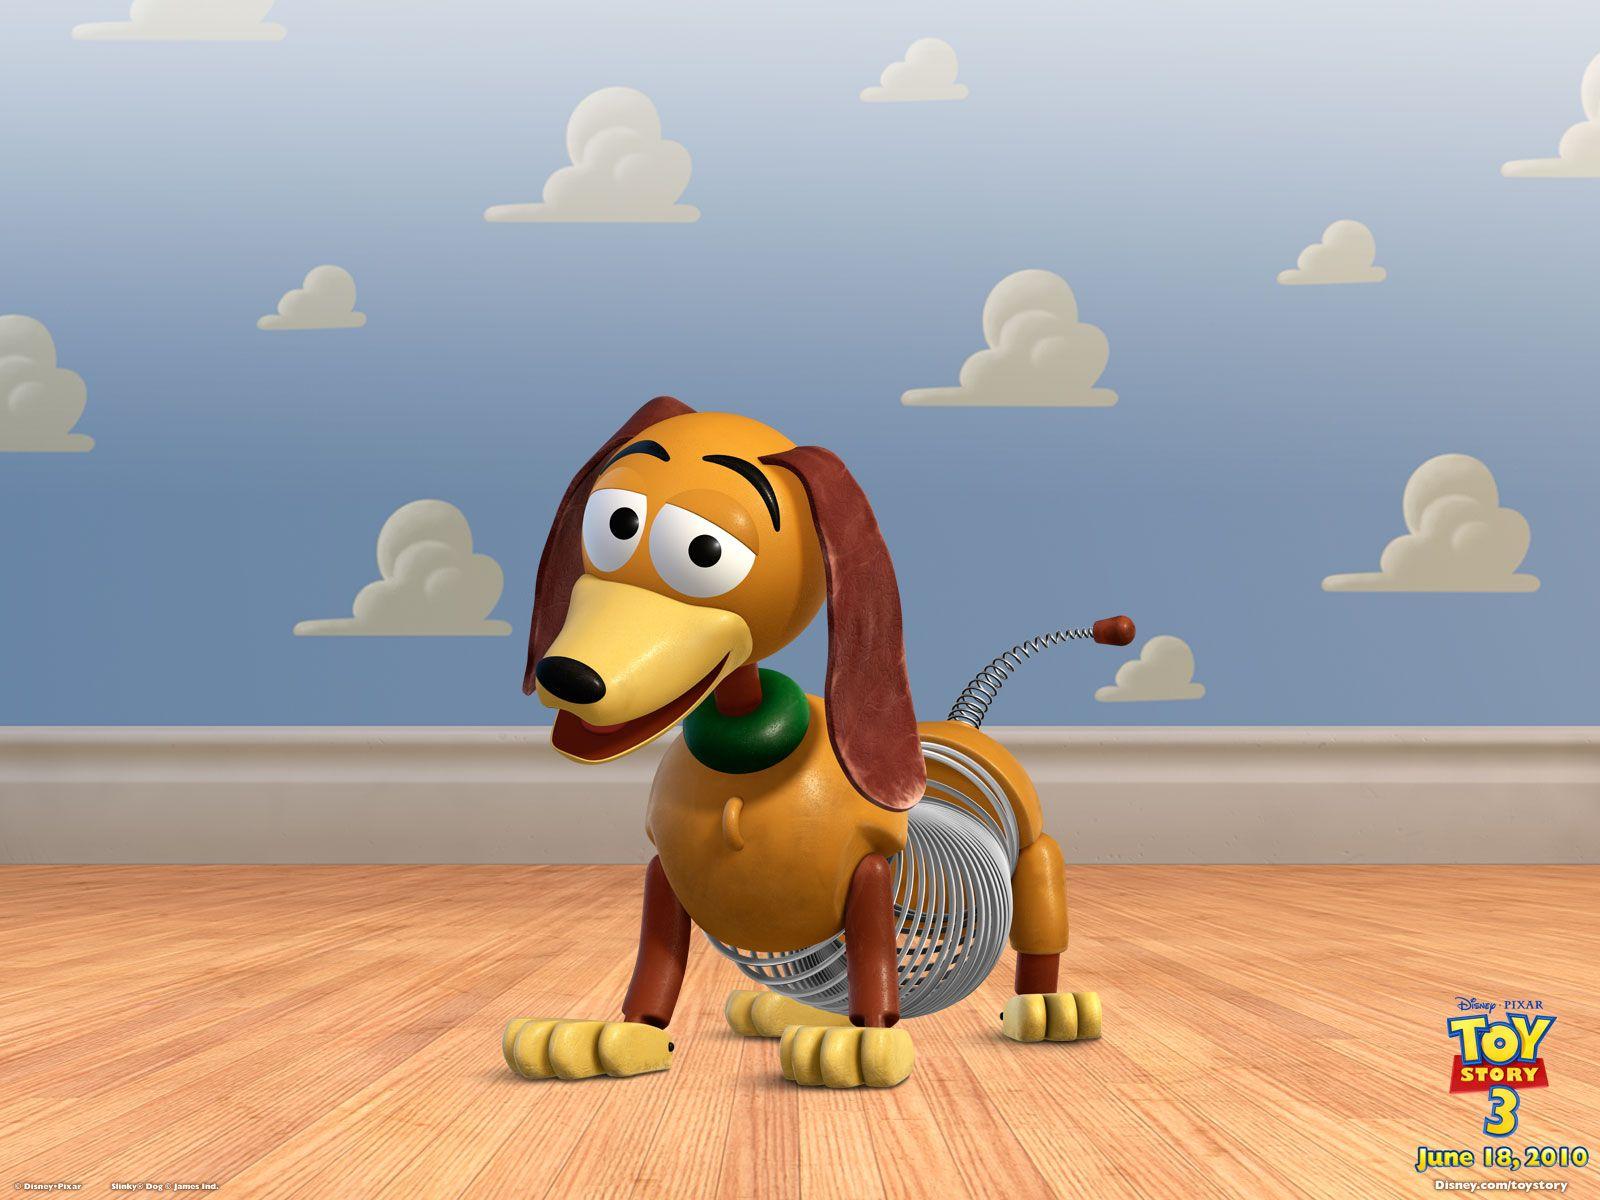 Toy Story 2 Slinky Dog Cartoon HD Wallpaper Image for HTC One M9